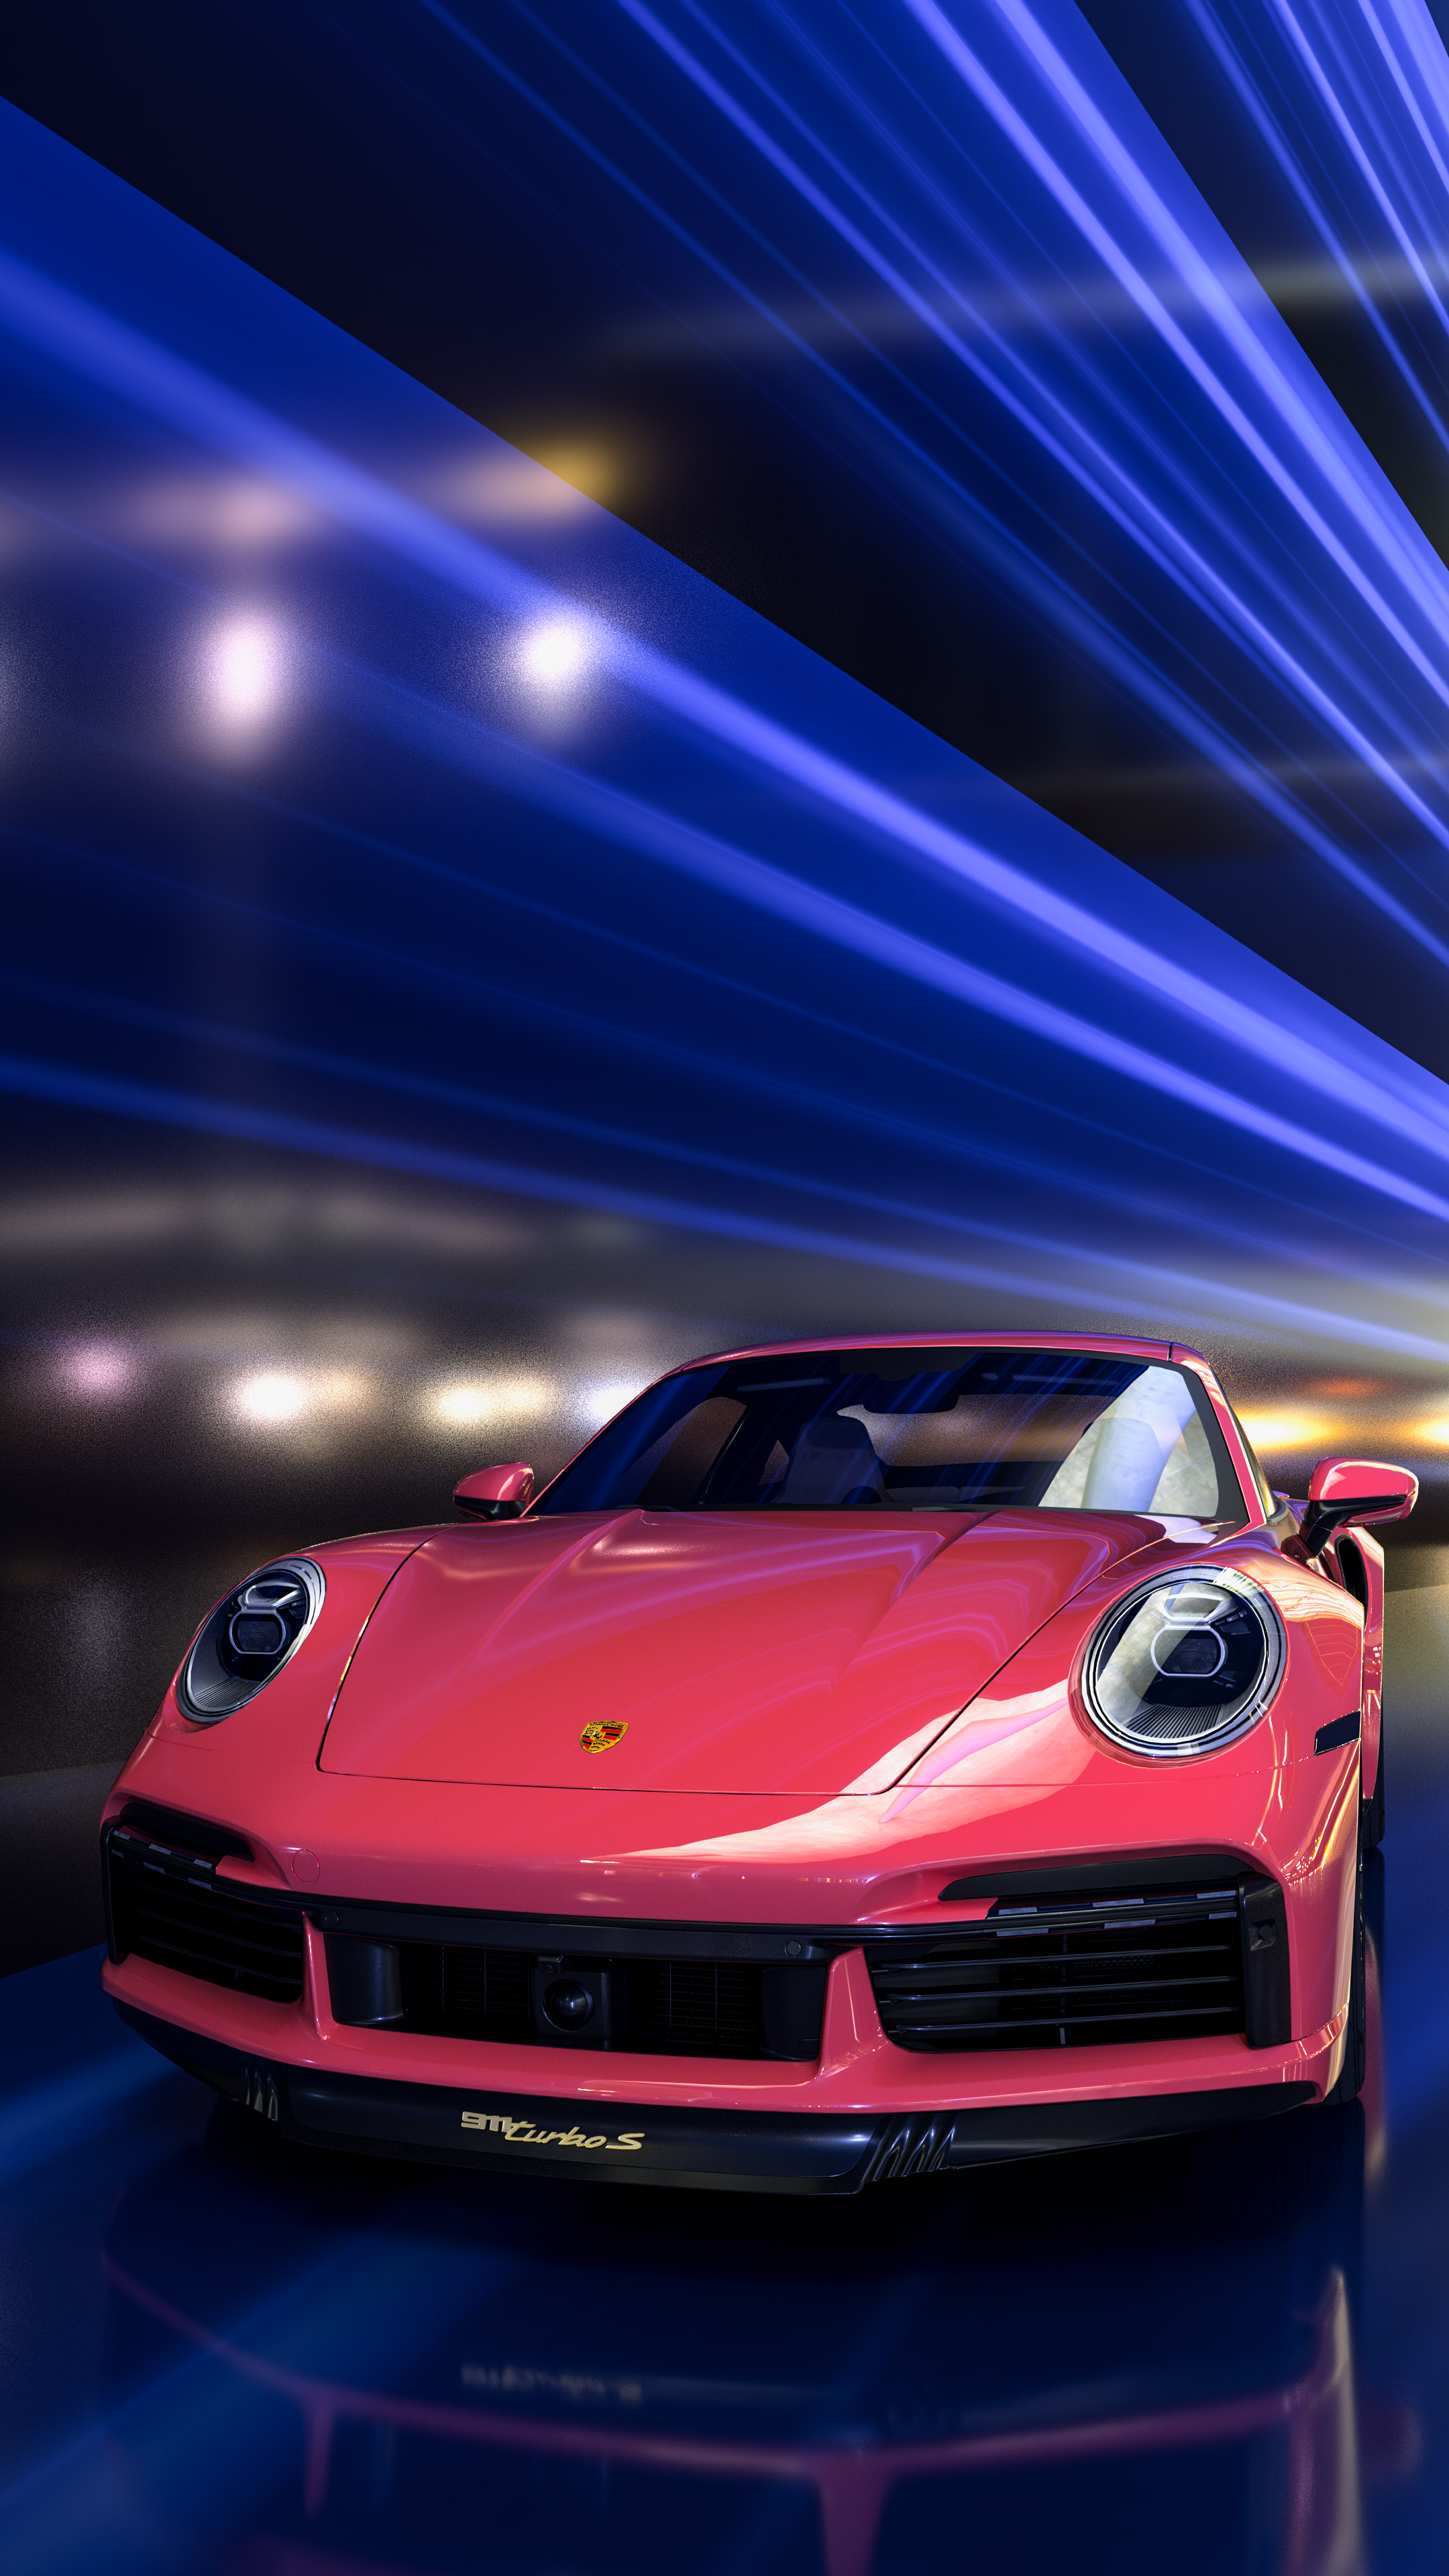 Experience the thrill of speed with our 4K iPhone wallpaper featuring the Porsche 911 sports car, a symbol of luxury and performance that will enhance your device.